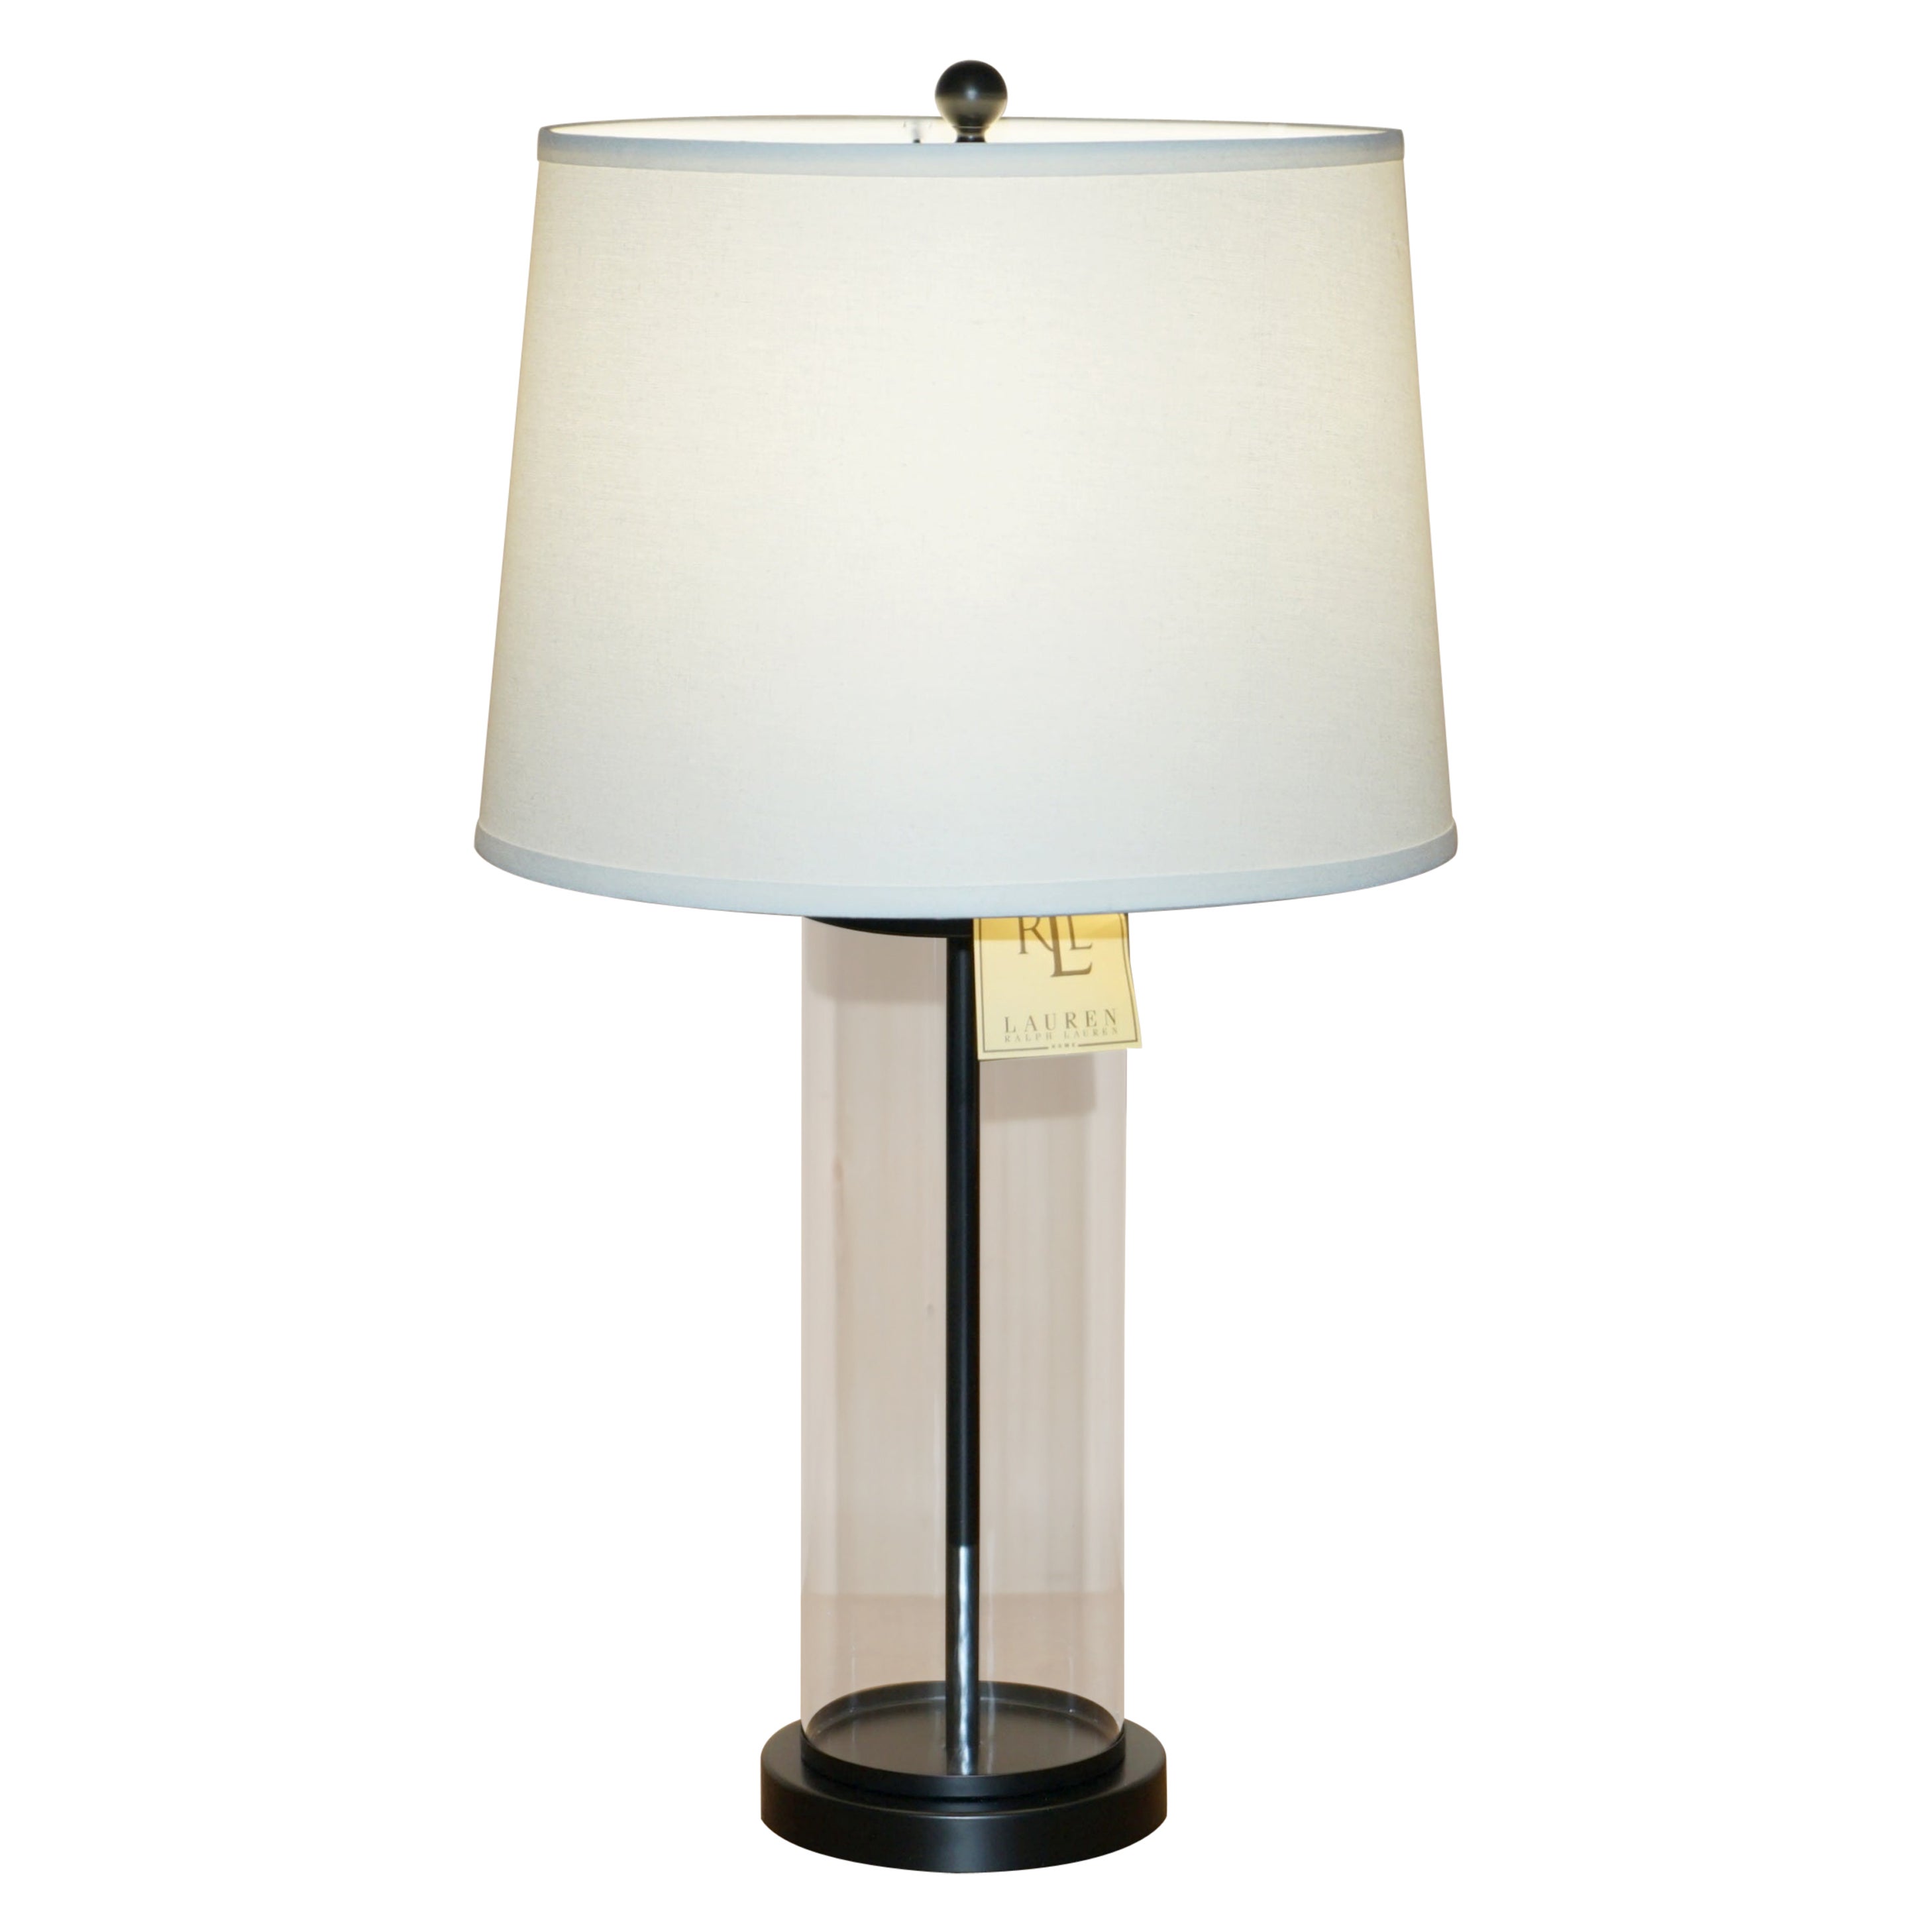 1 OF 4 BRAND NEW IN THE BOX RALPH LAUREN BLACK STORM LANTERN GLASS TABLE LAMPs For Sale